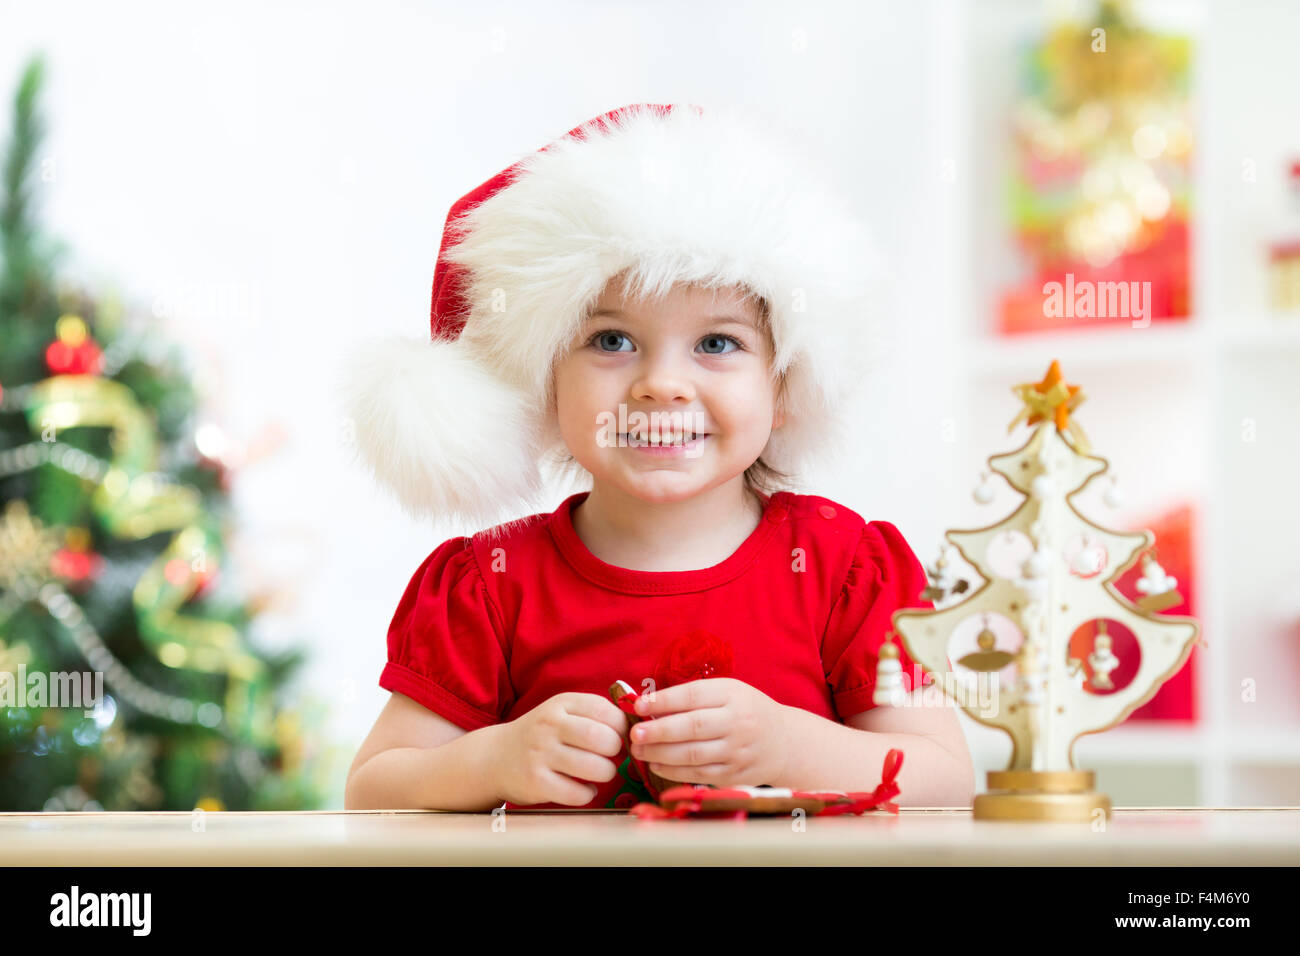 Little girl child wearing a festive red Santa hat with Christmas cookies Stock Photo